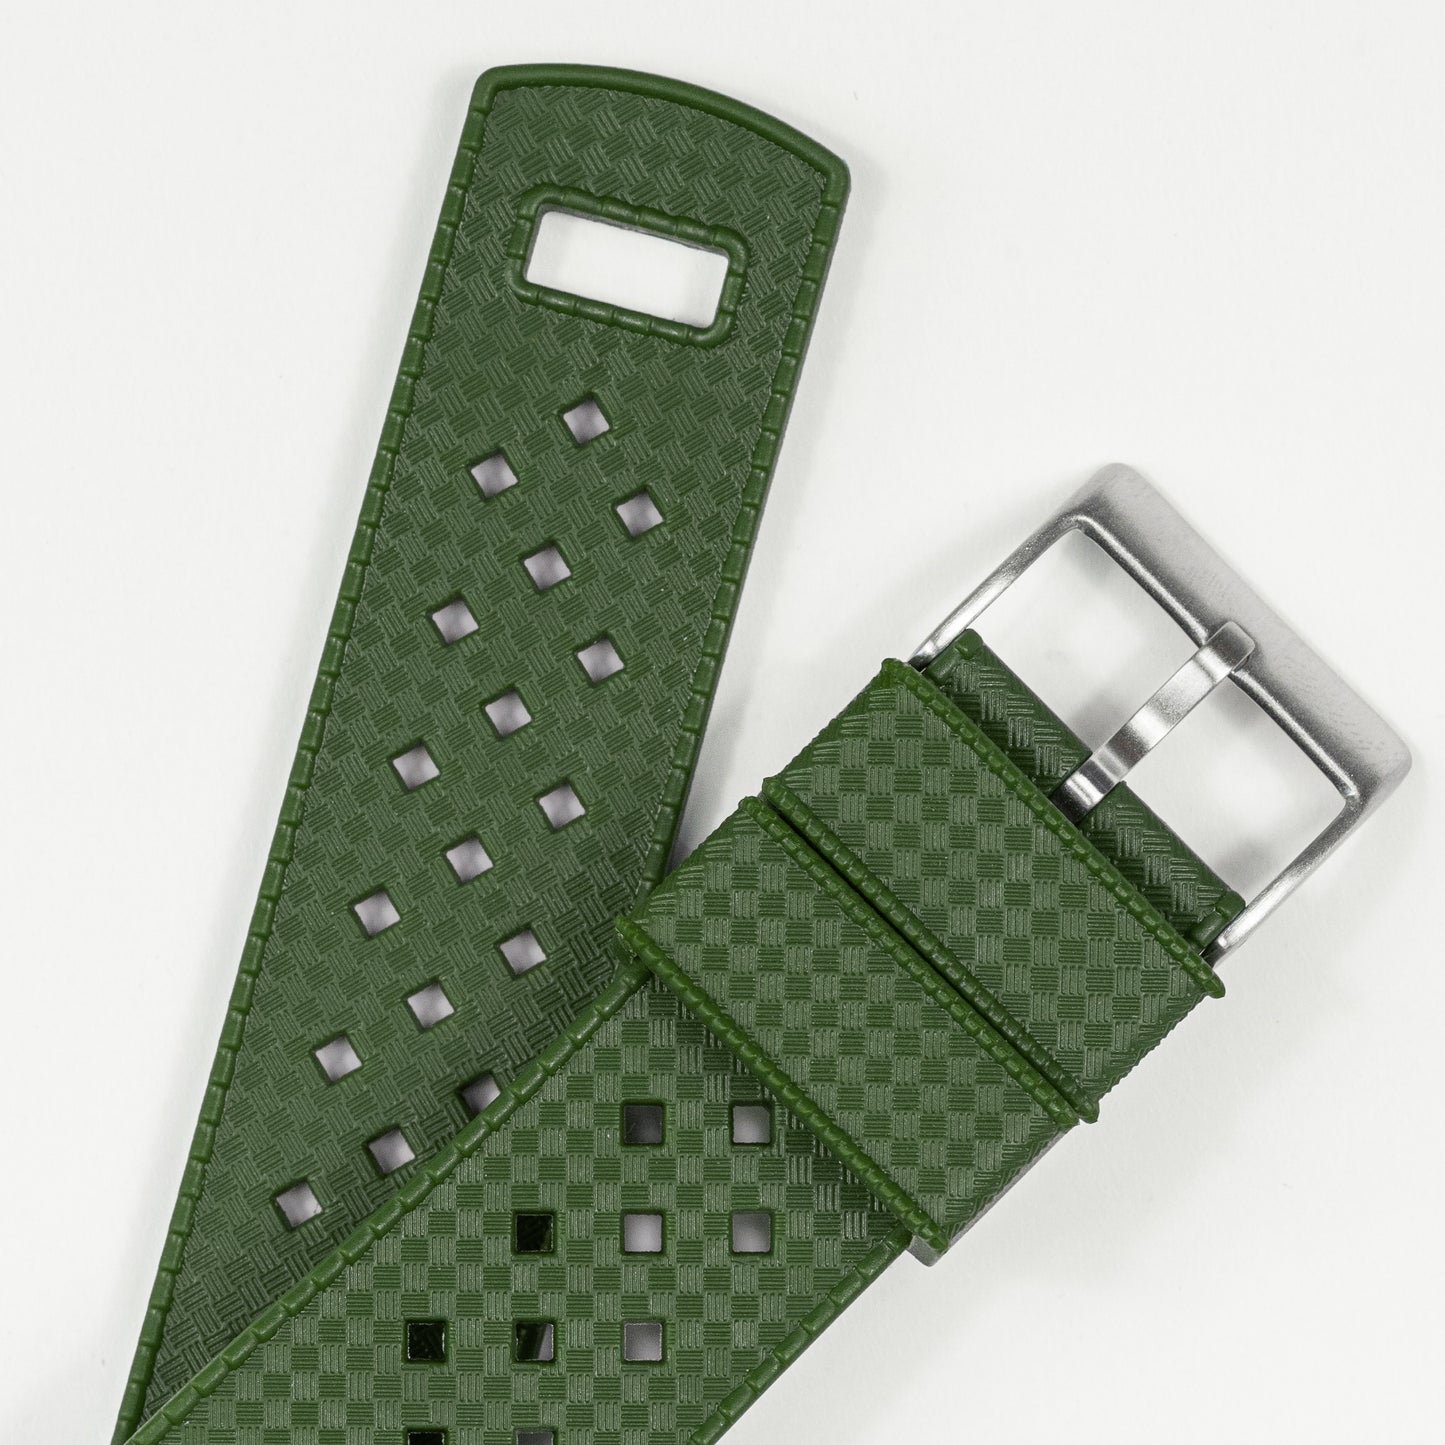 Amazfit Bip | Tropical-Style | Army Green - Barton Watch Bands